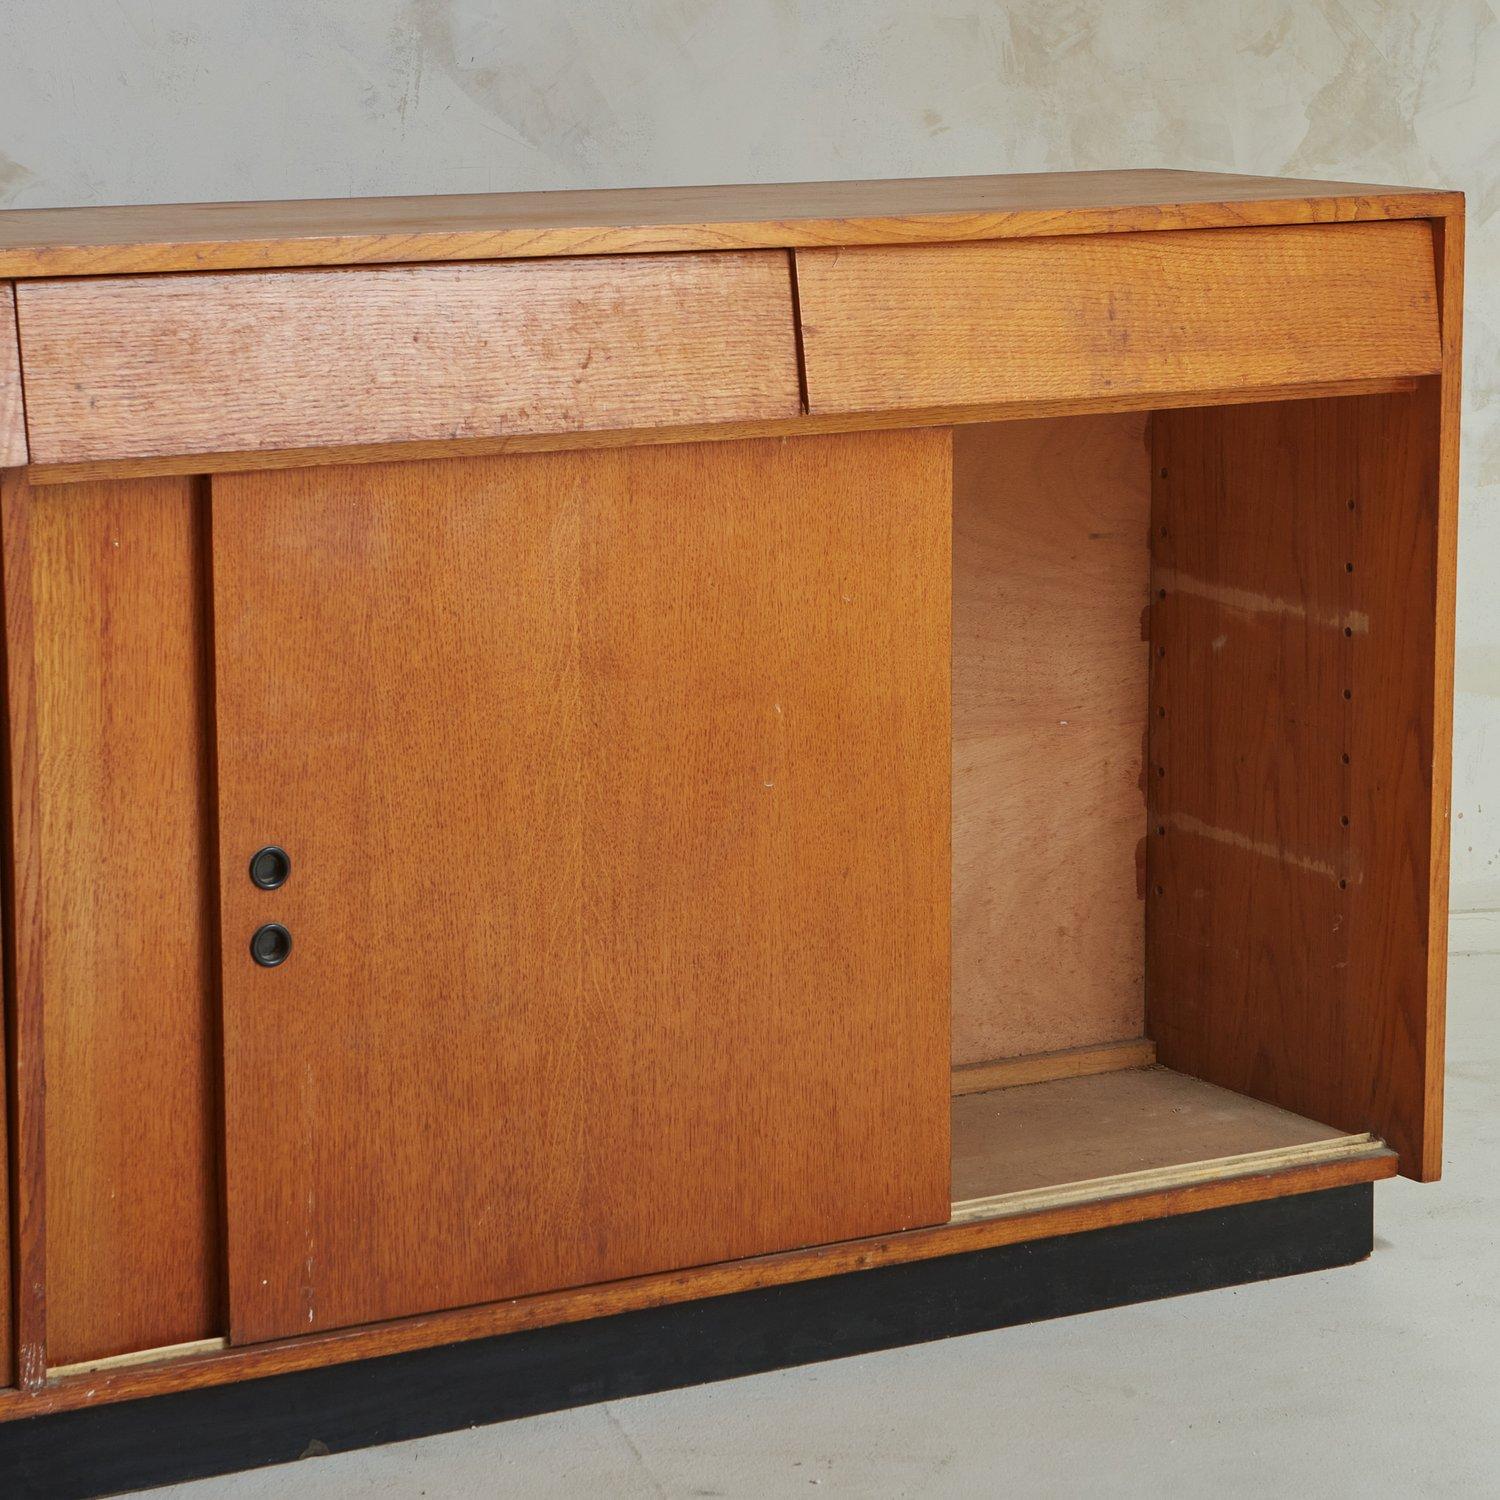 Mid-20th Century Monumental Oak Shop Cabinet with Drawers, France 1950s For Sale